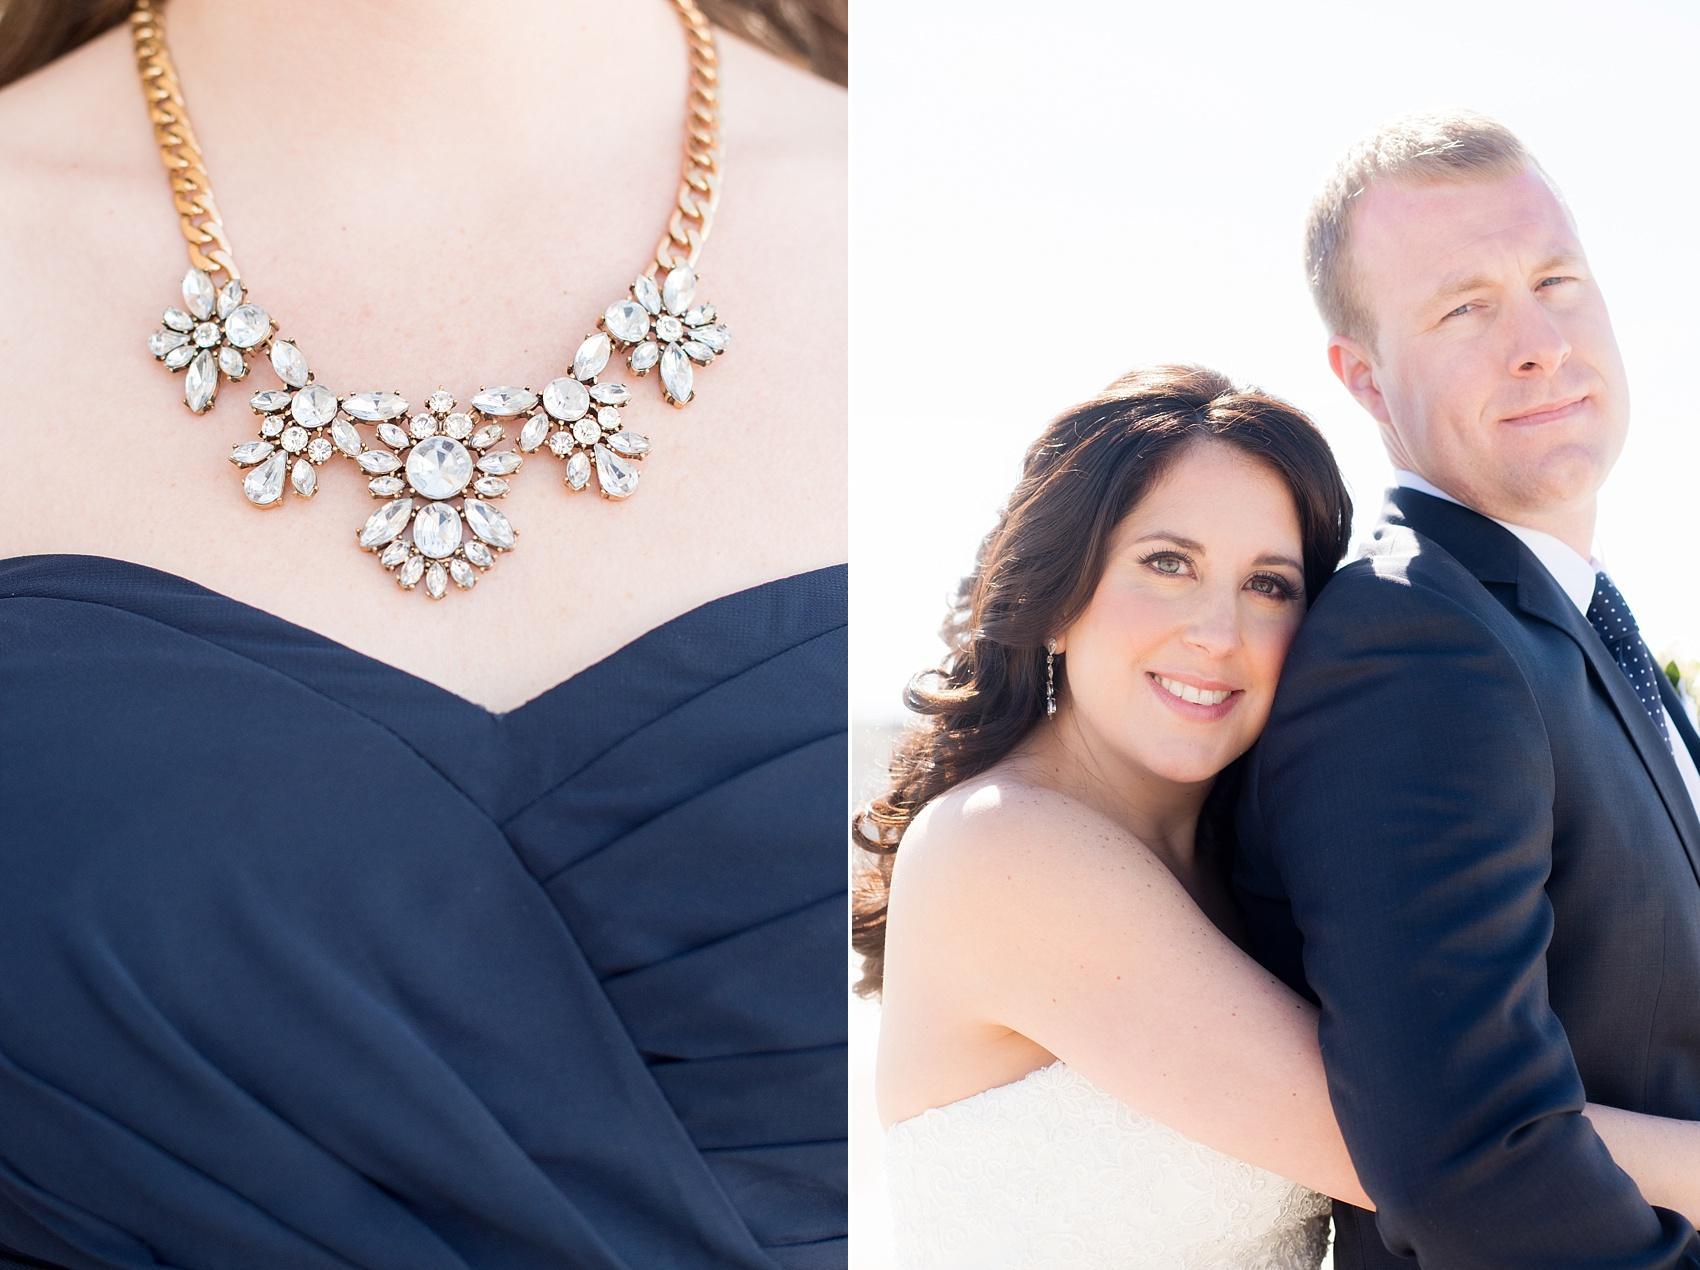 Photo by Mikkel Paige photography. Bride and groom photos at the beach for a spring wedding at Windows on the Water, New Jersey and bridesmaids statement necklace.